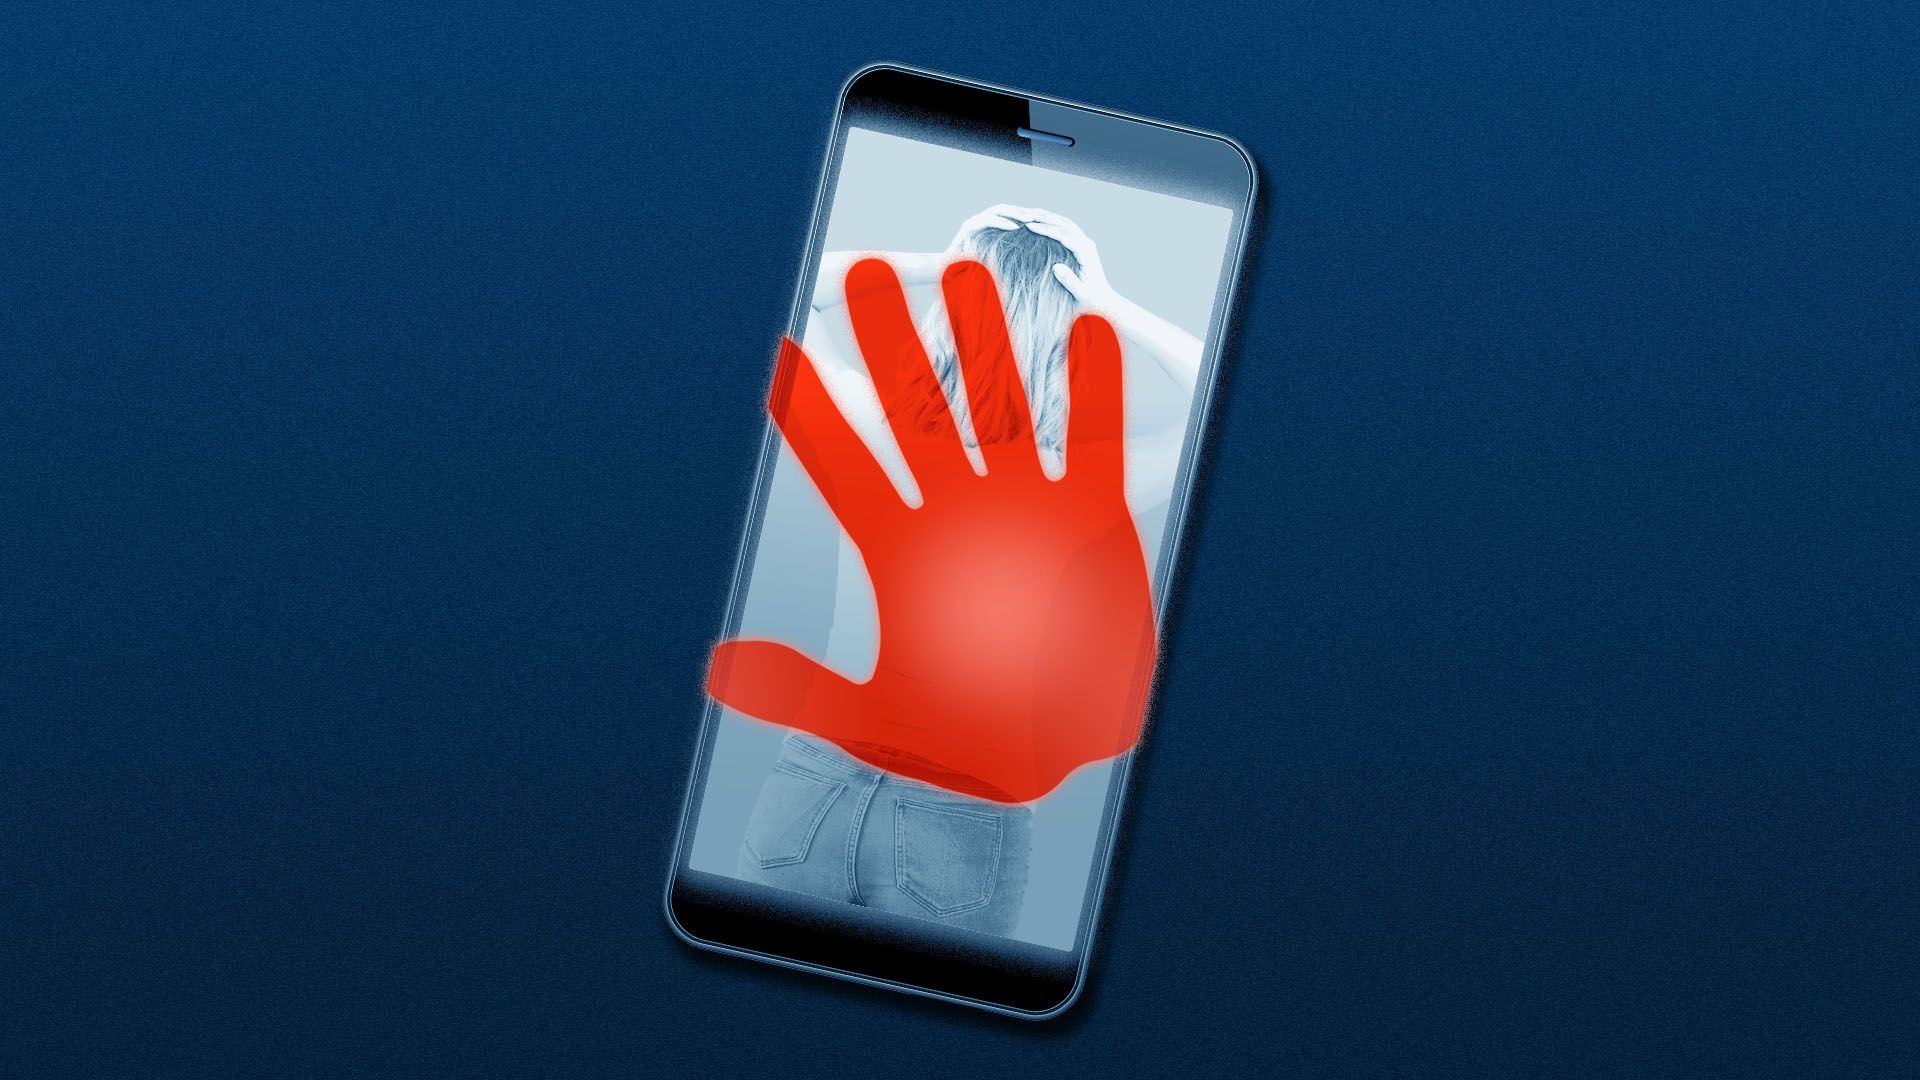 Illustration of a cell phone with an image of a woman on the screen and a red handprint over it